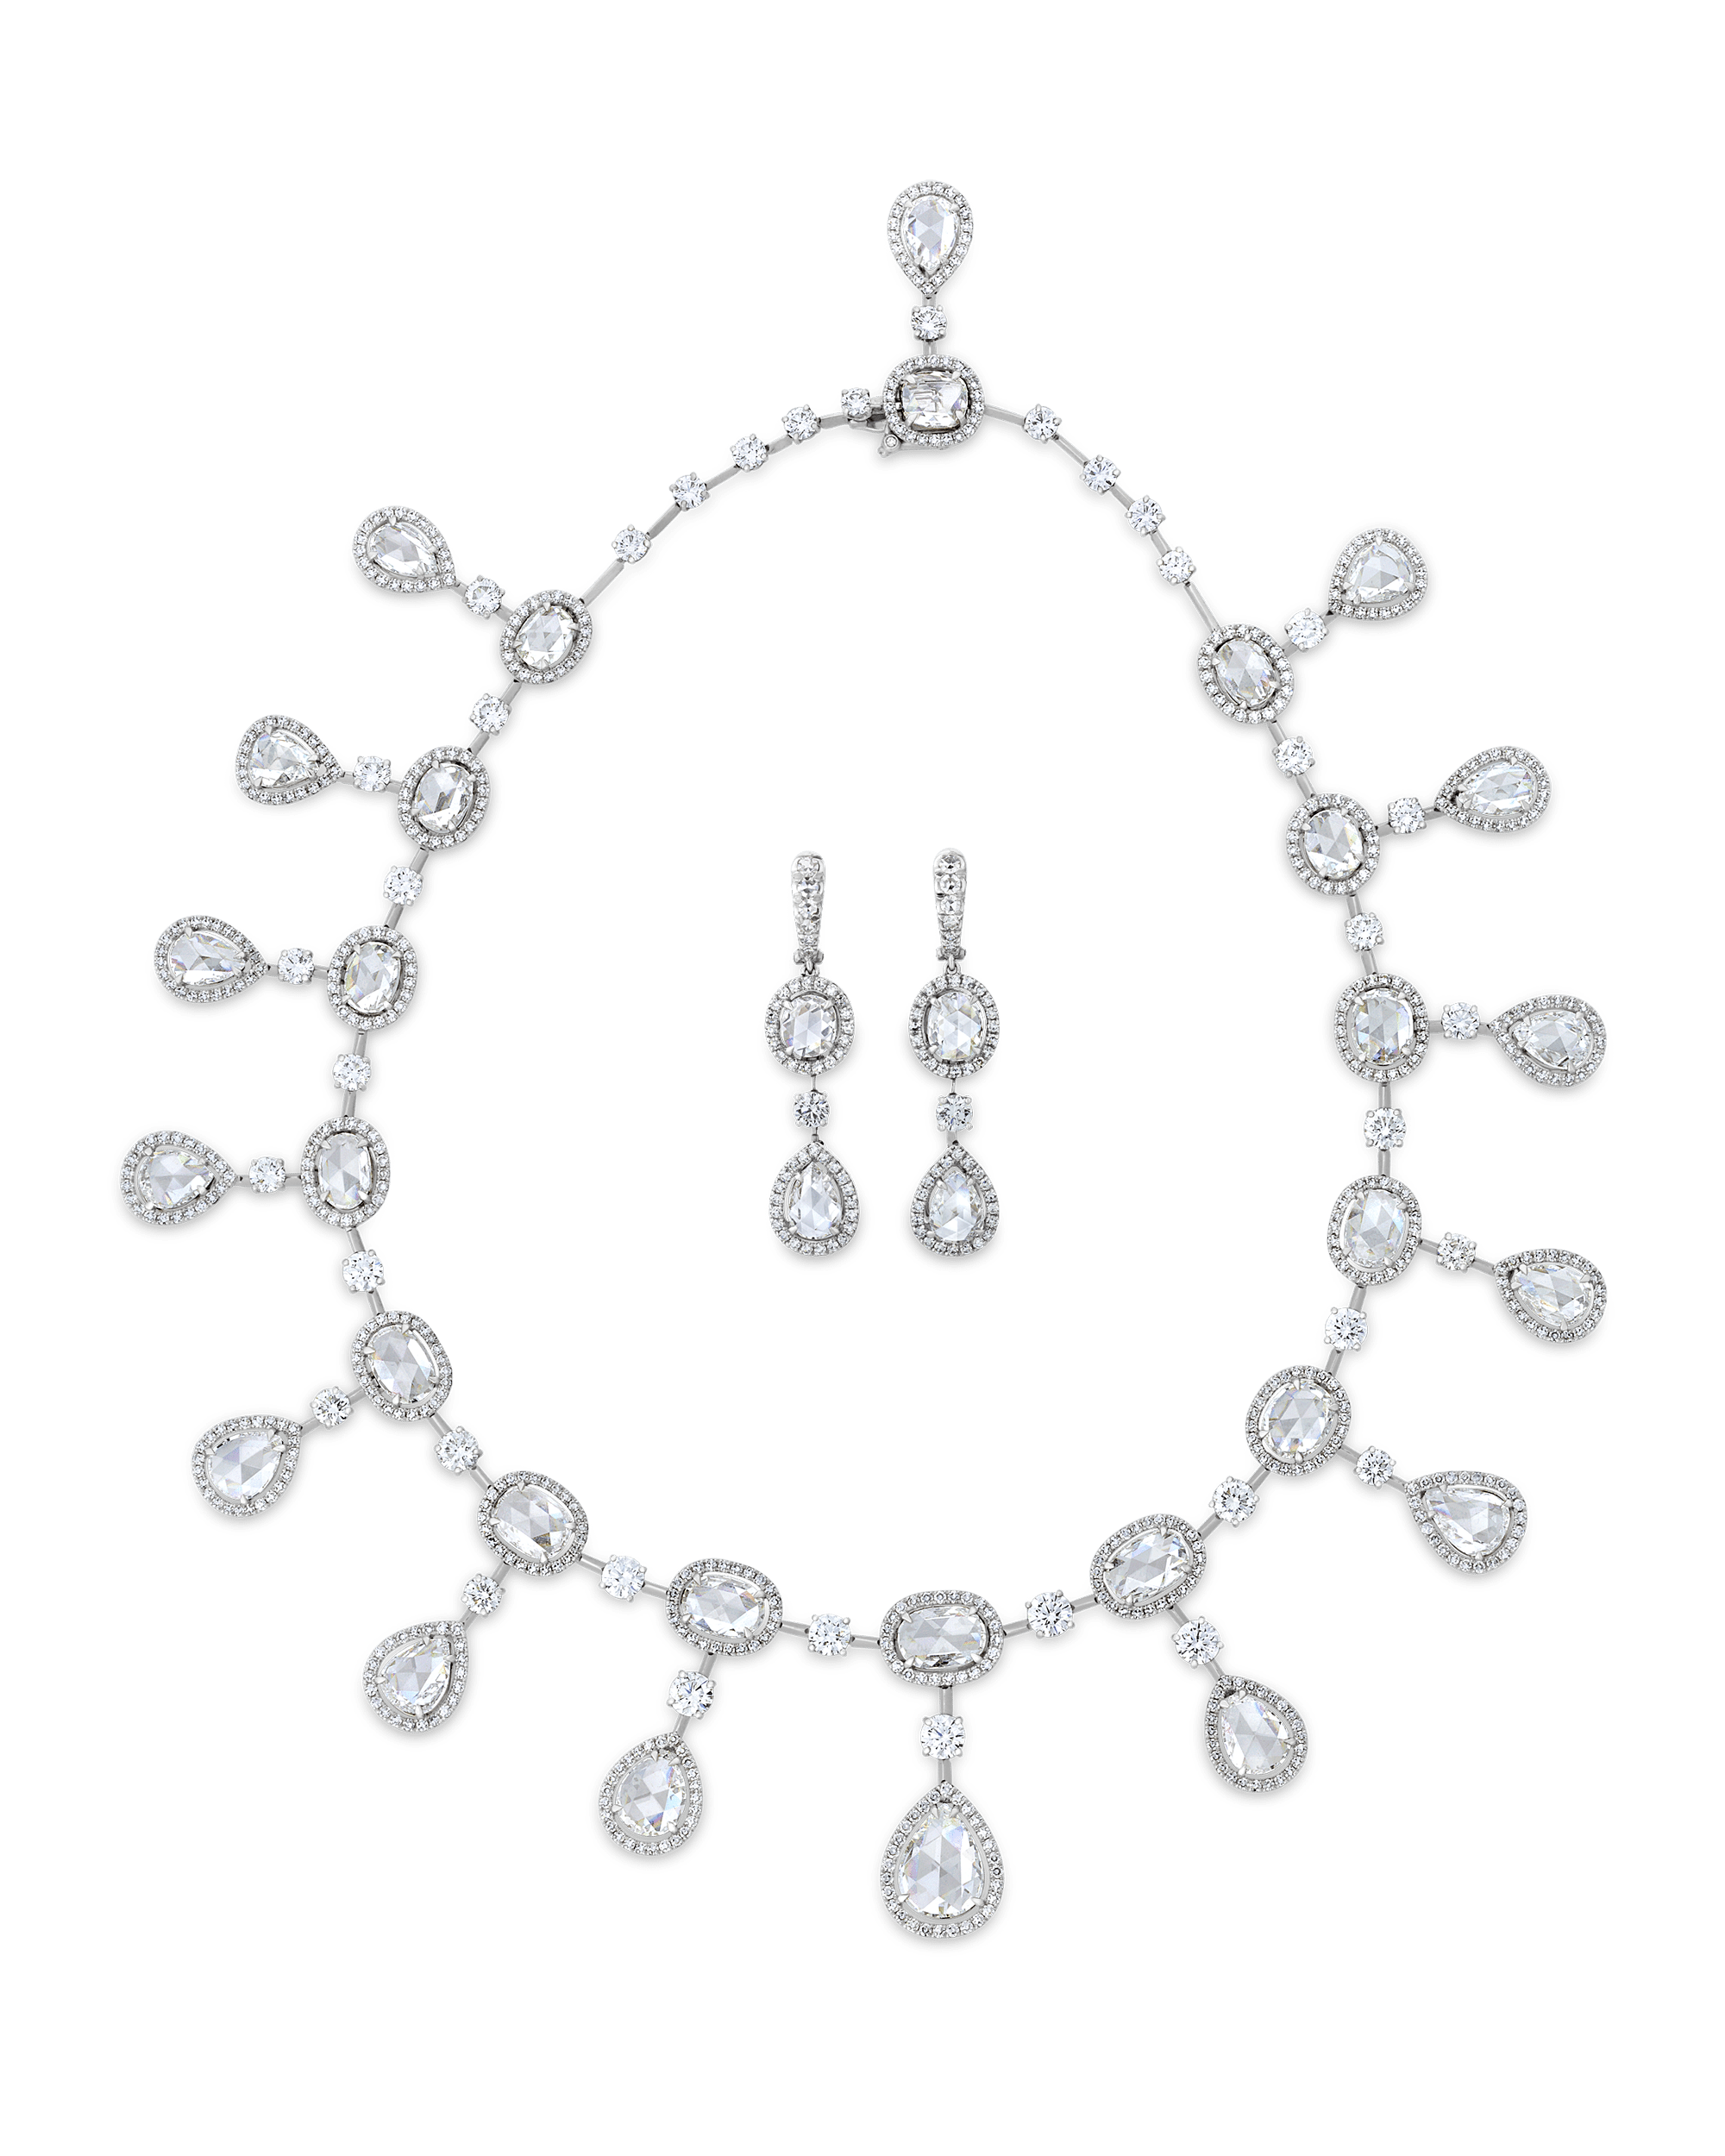 Rose Cut Diamond Necklace and Earrings, 61.28 carats